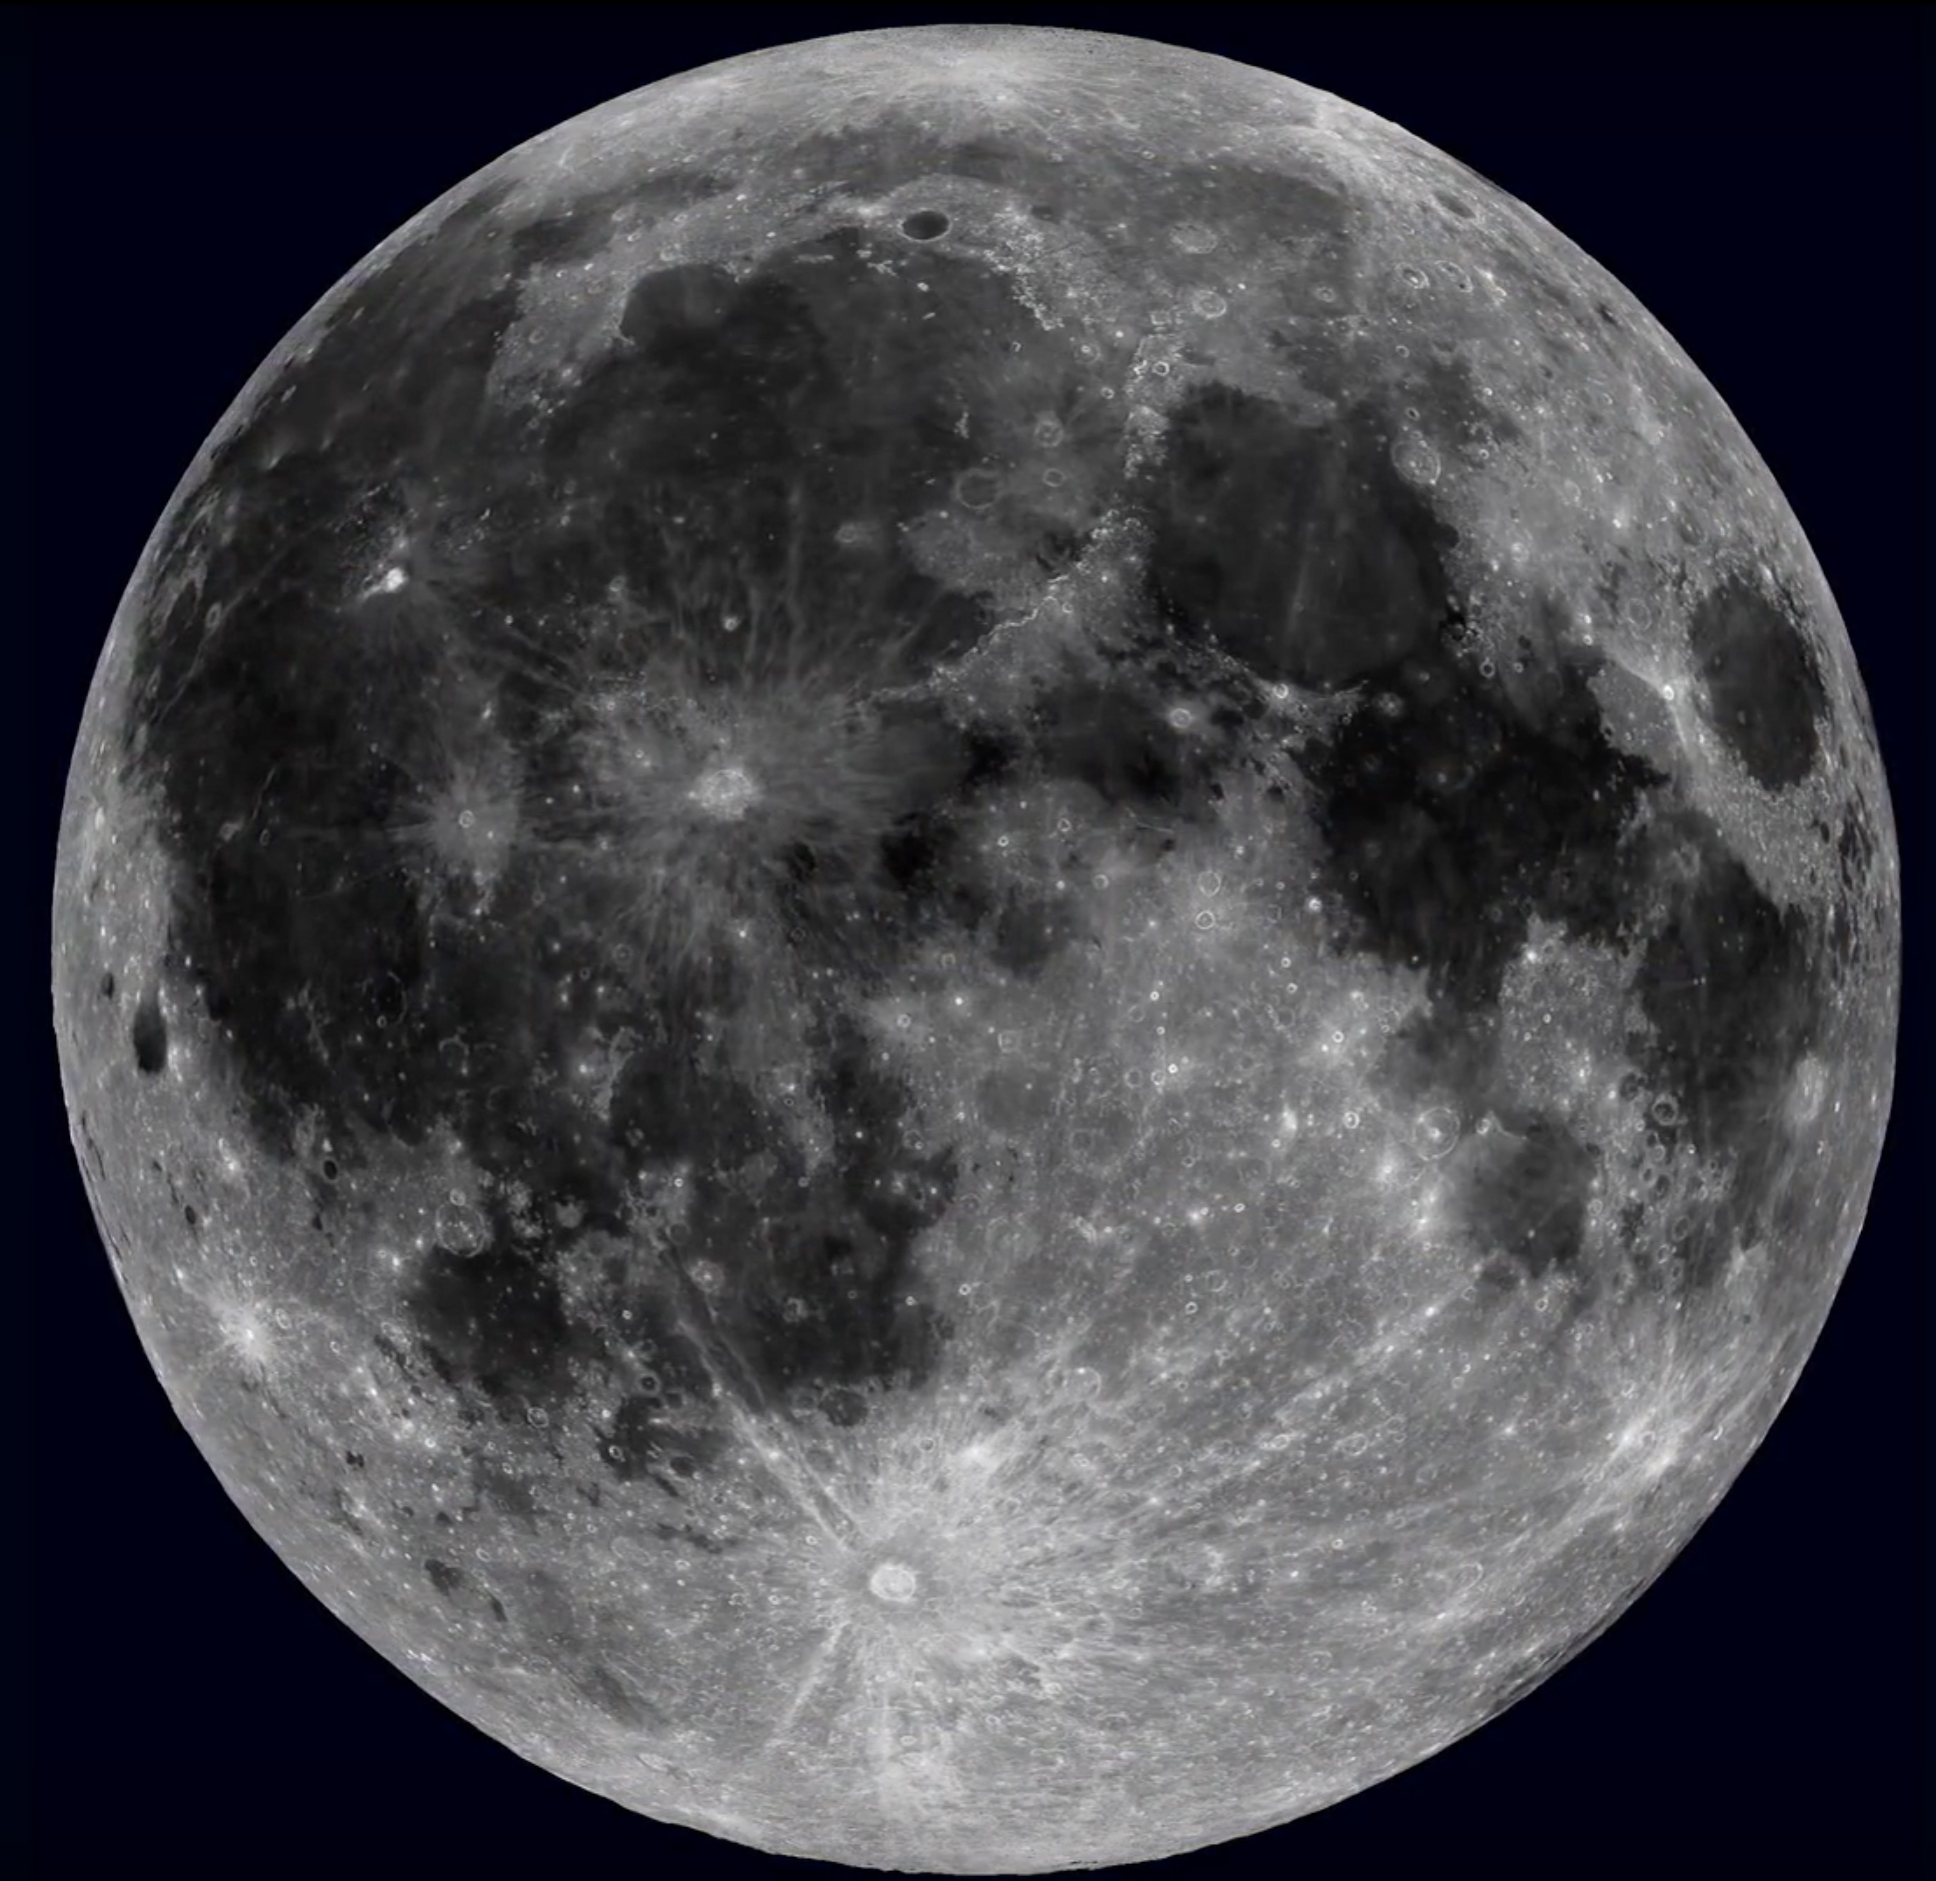 The near side of Earth's Moon, as seen based on data from cameras aboard NASA's robotic Lunar Reconnaissance Orbiter spacecraft.